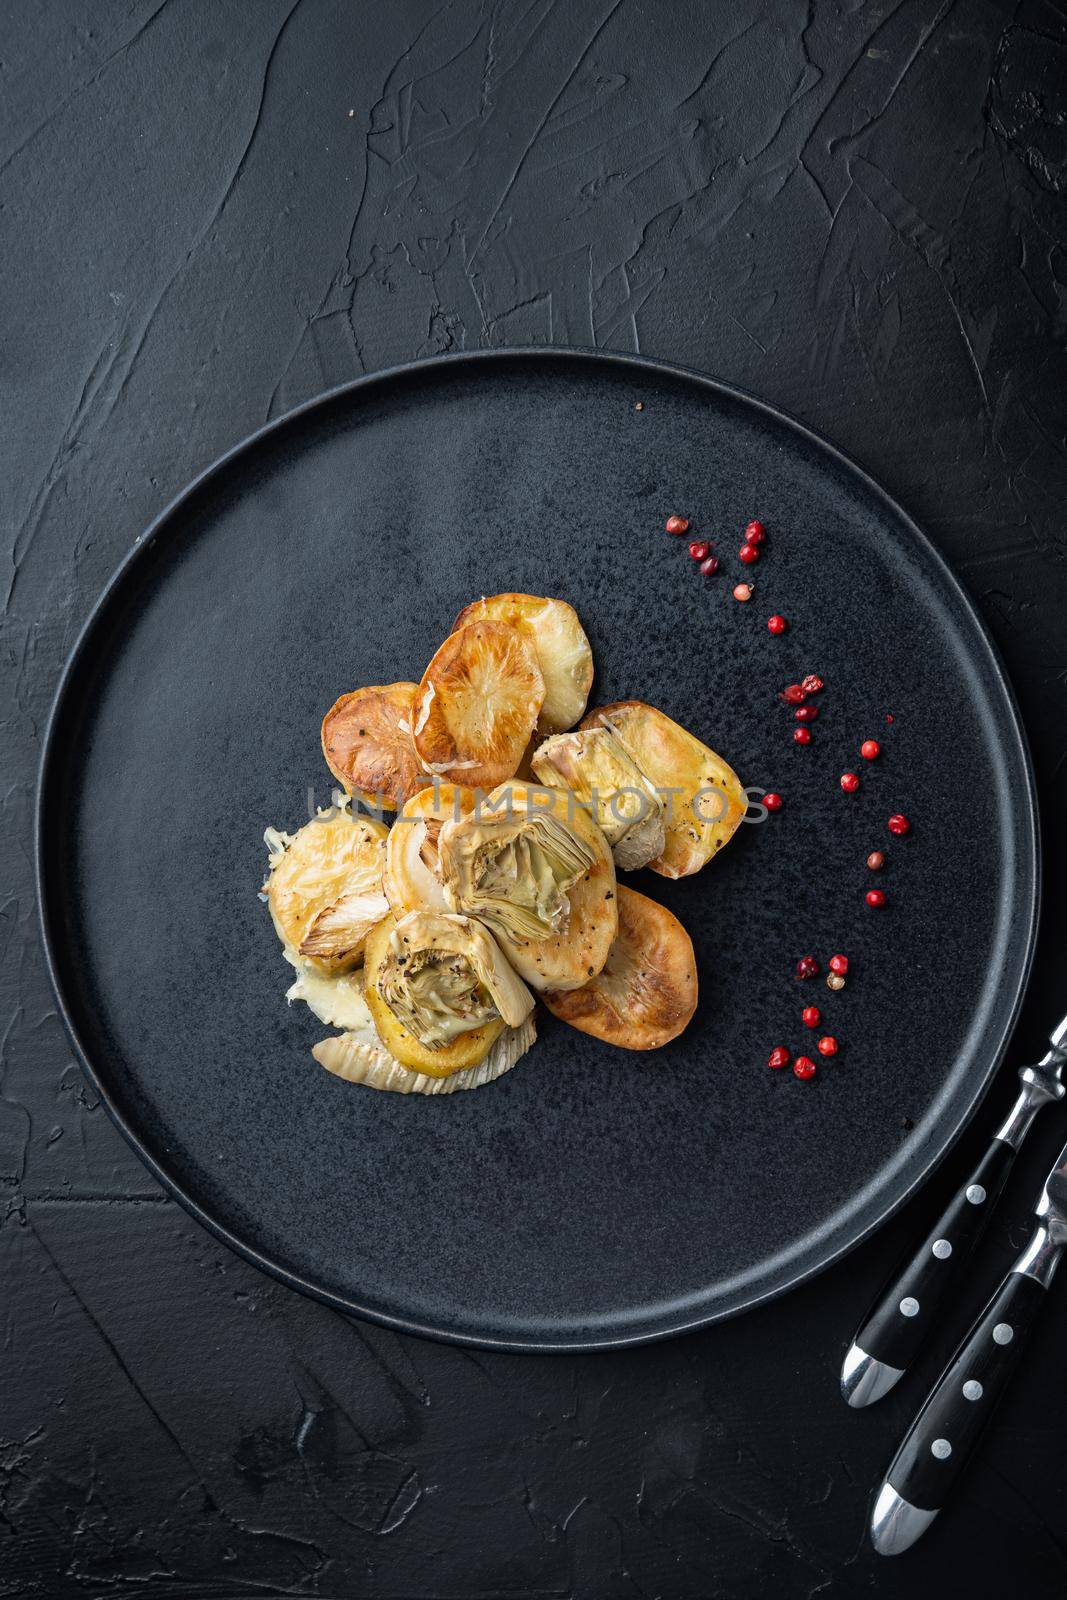 Baked potato, artichoke with fennel al forno, on black textured background, top view